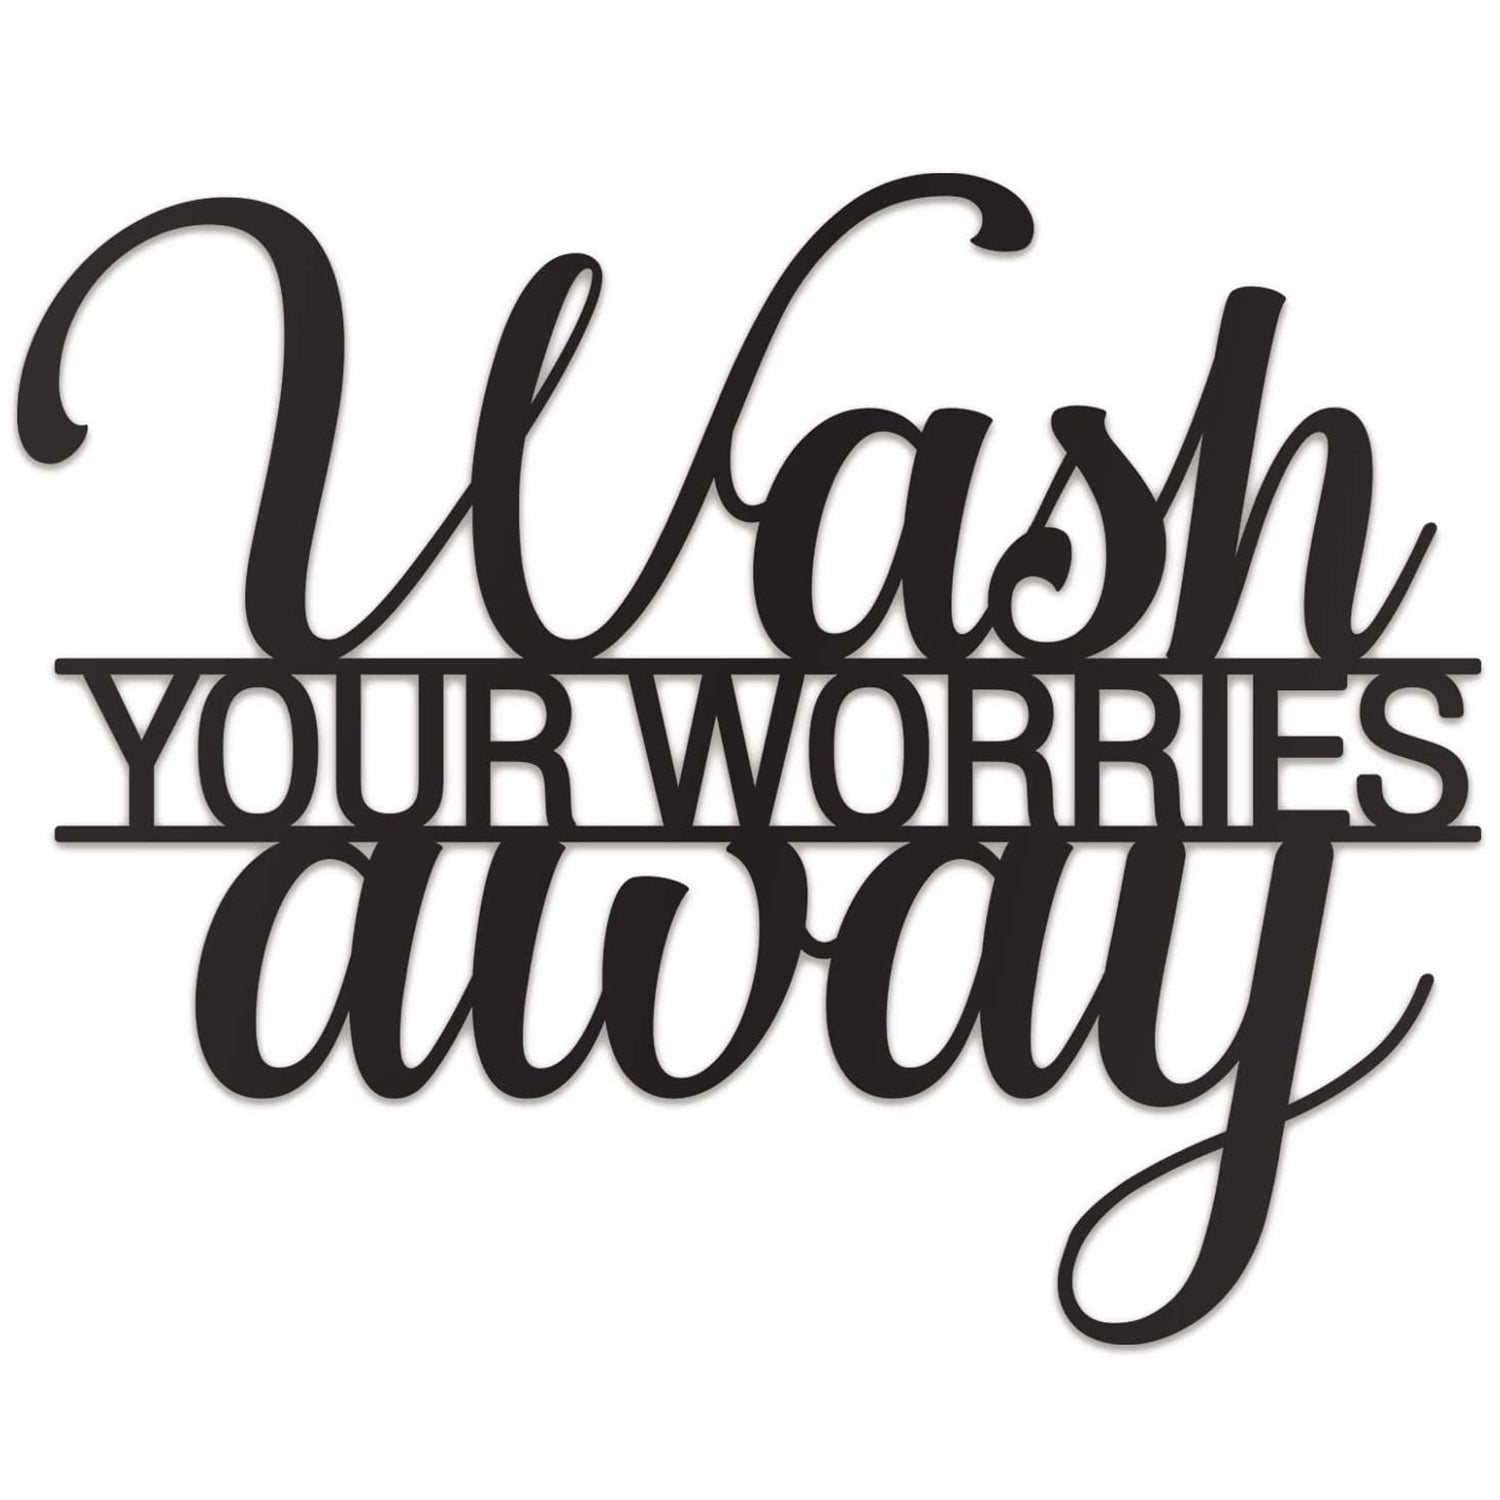 Wash Your Worries Away Sign Metal Wall Decor - 14"X11" Black Modern Beautiful Wash Your Worries Away Farmhouse Metal Wall Signs